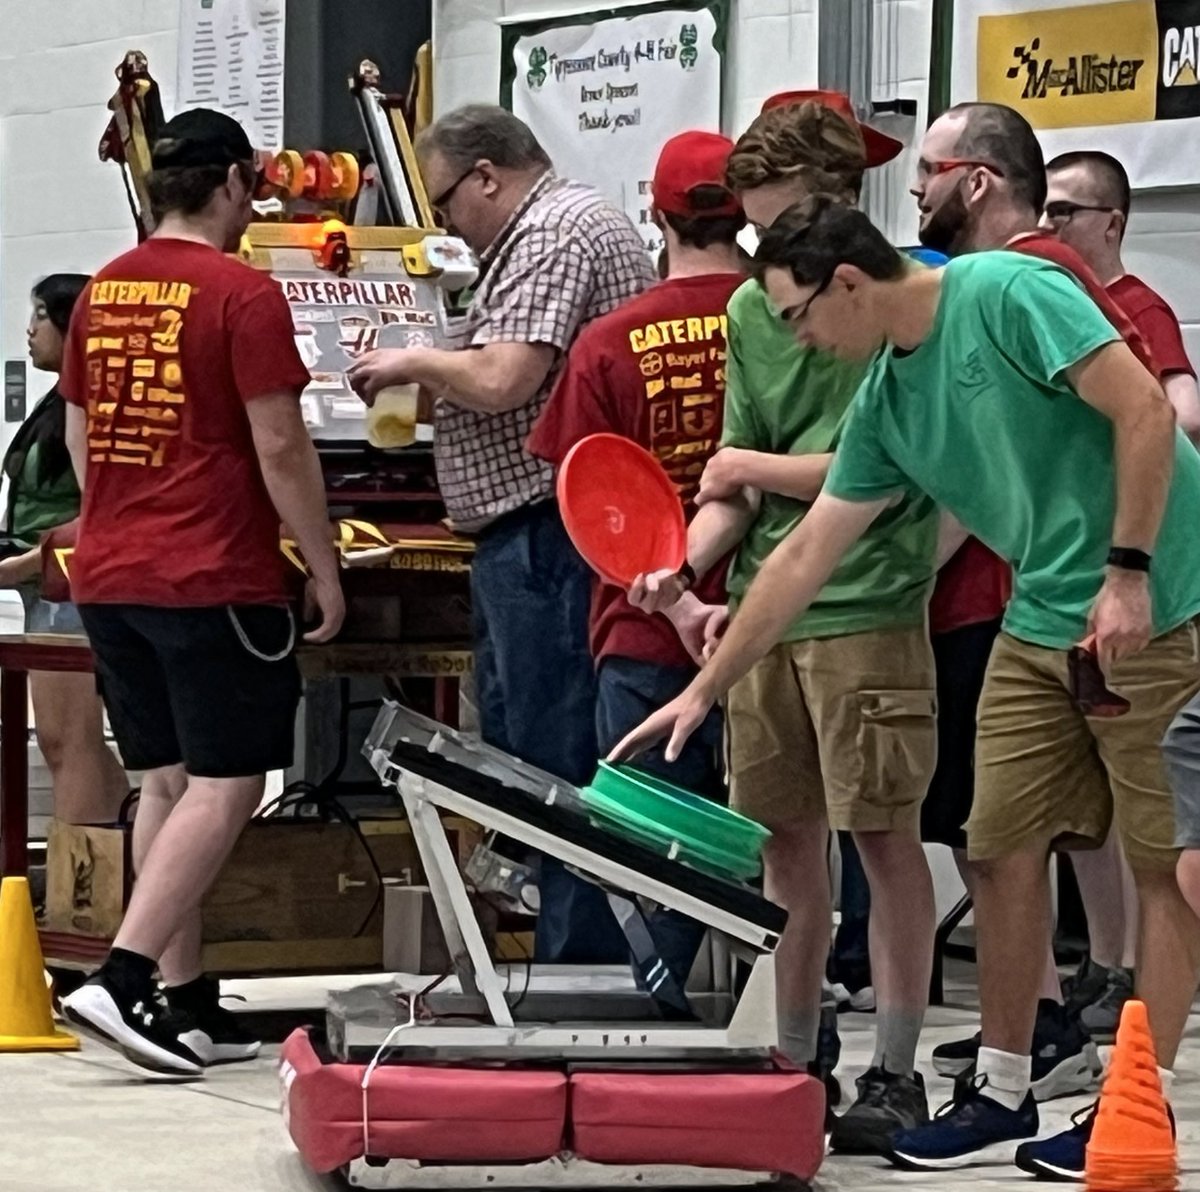 Love seeing #TSCSchools robotics teams sharing their passion with Tippecanoe County fair goers. These robots are built & powered by some amazing students! There is a place for you to get involved; call McCutcheon or Harrison for info. @Team4272 @FIRSTweets @1747robotics